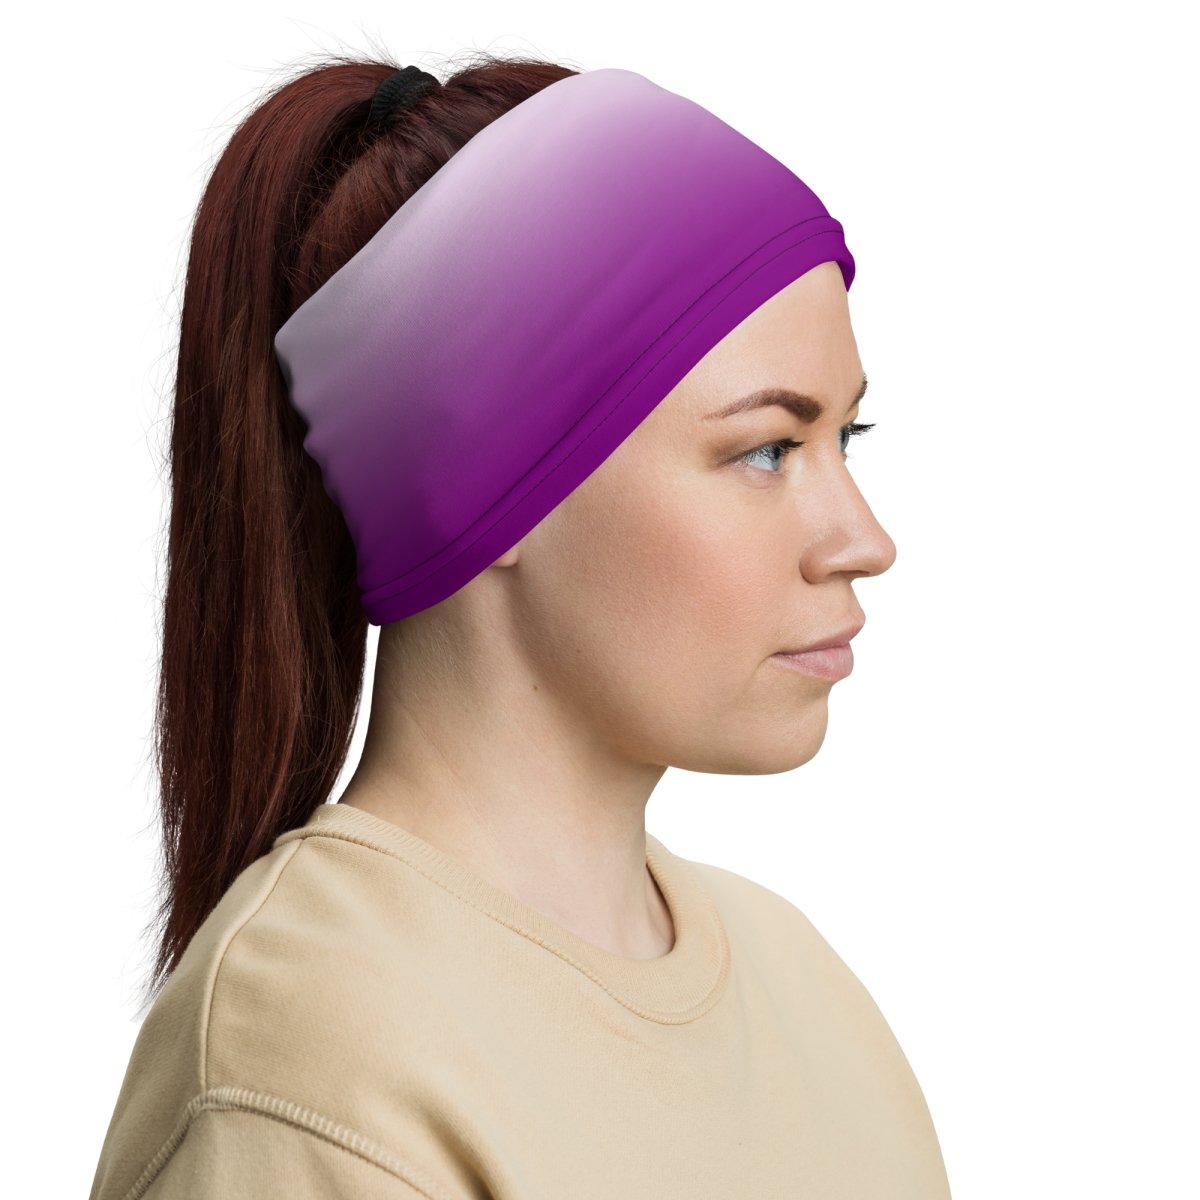 Ombré Asexual Flag Neck Gaiter - On Trend Shirts